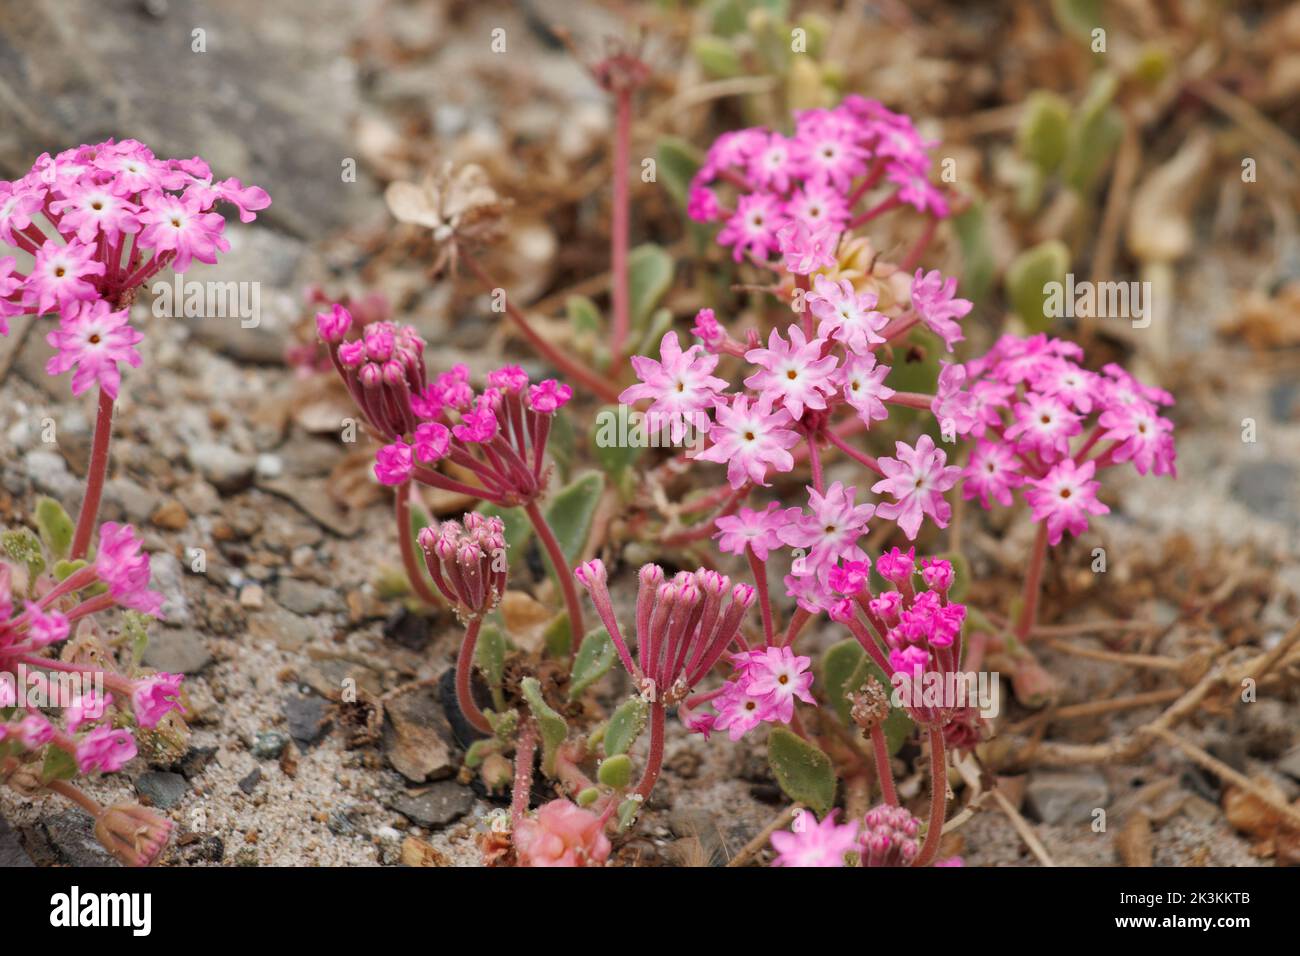 Pink flowering racemose capitate cluster inflorescences of Abronia Umbellata, Nyctaginaceae, native perennial herb in Coastal Ventura County, Summer. Stock Photo